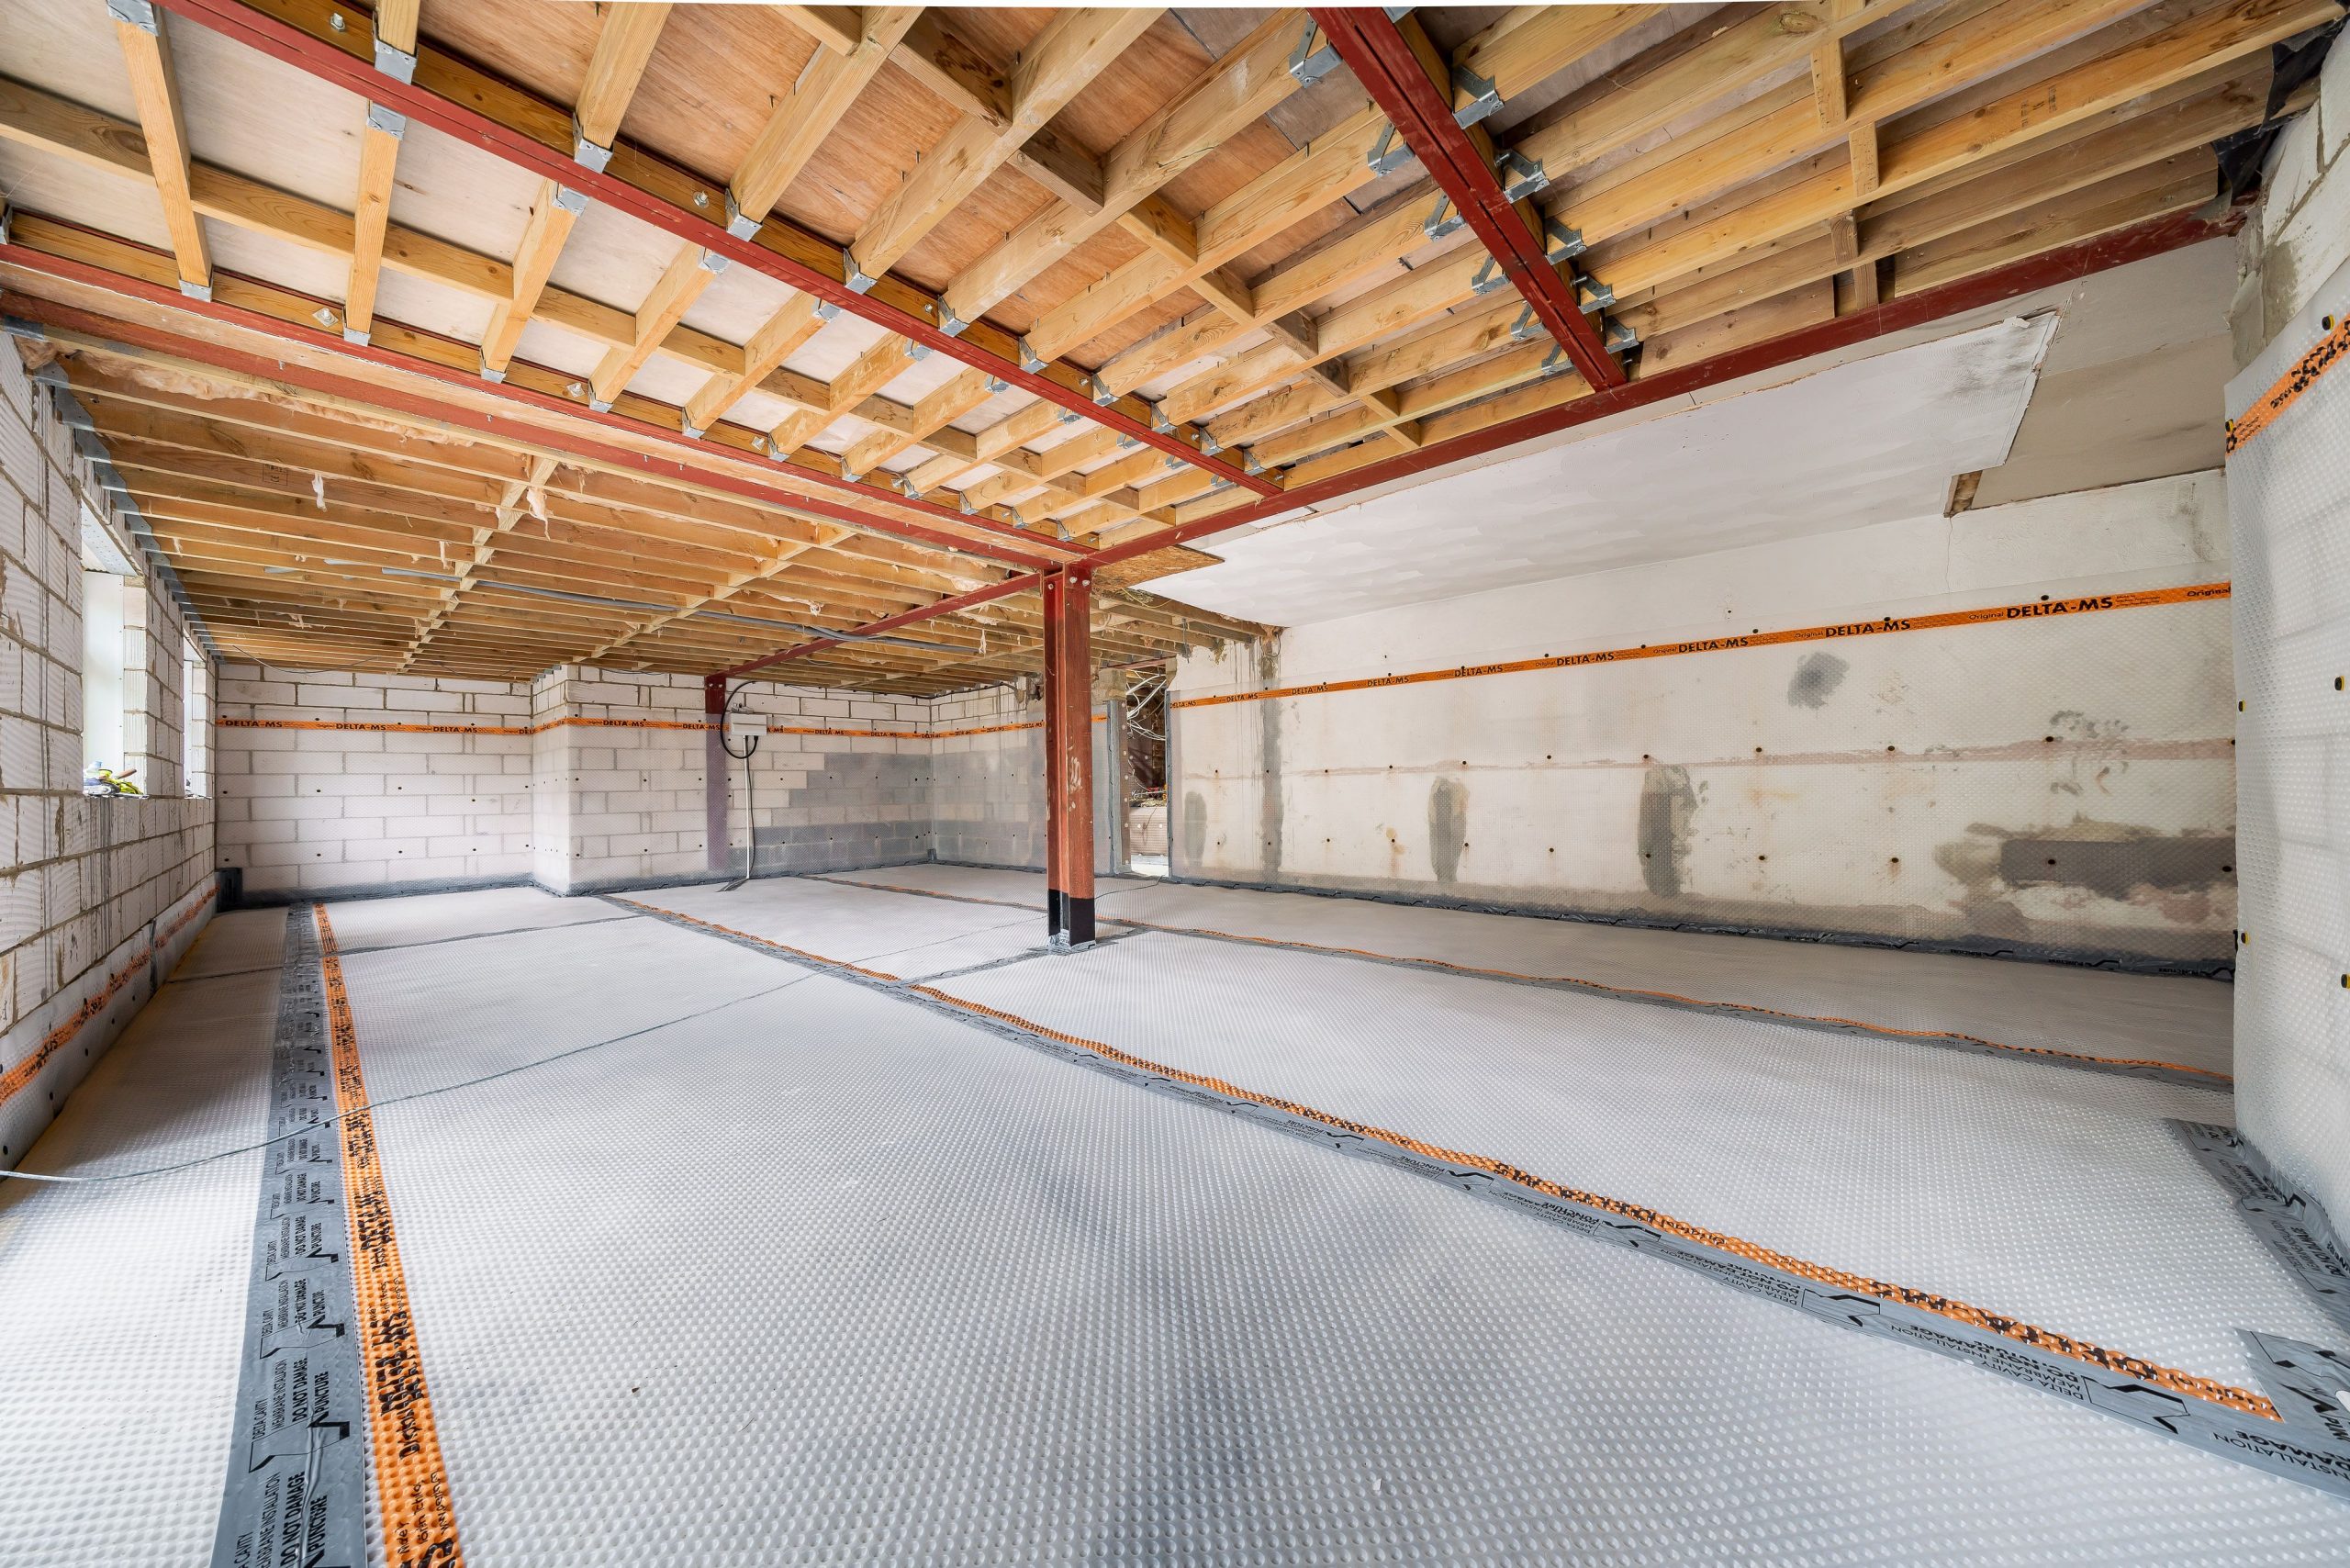 STRUCTURAL WATERPROOFING – PRIVATE RESIDENCE @DeltaMembranes